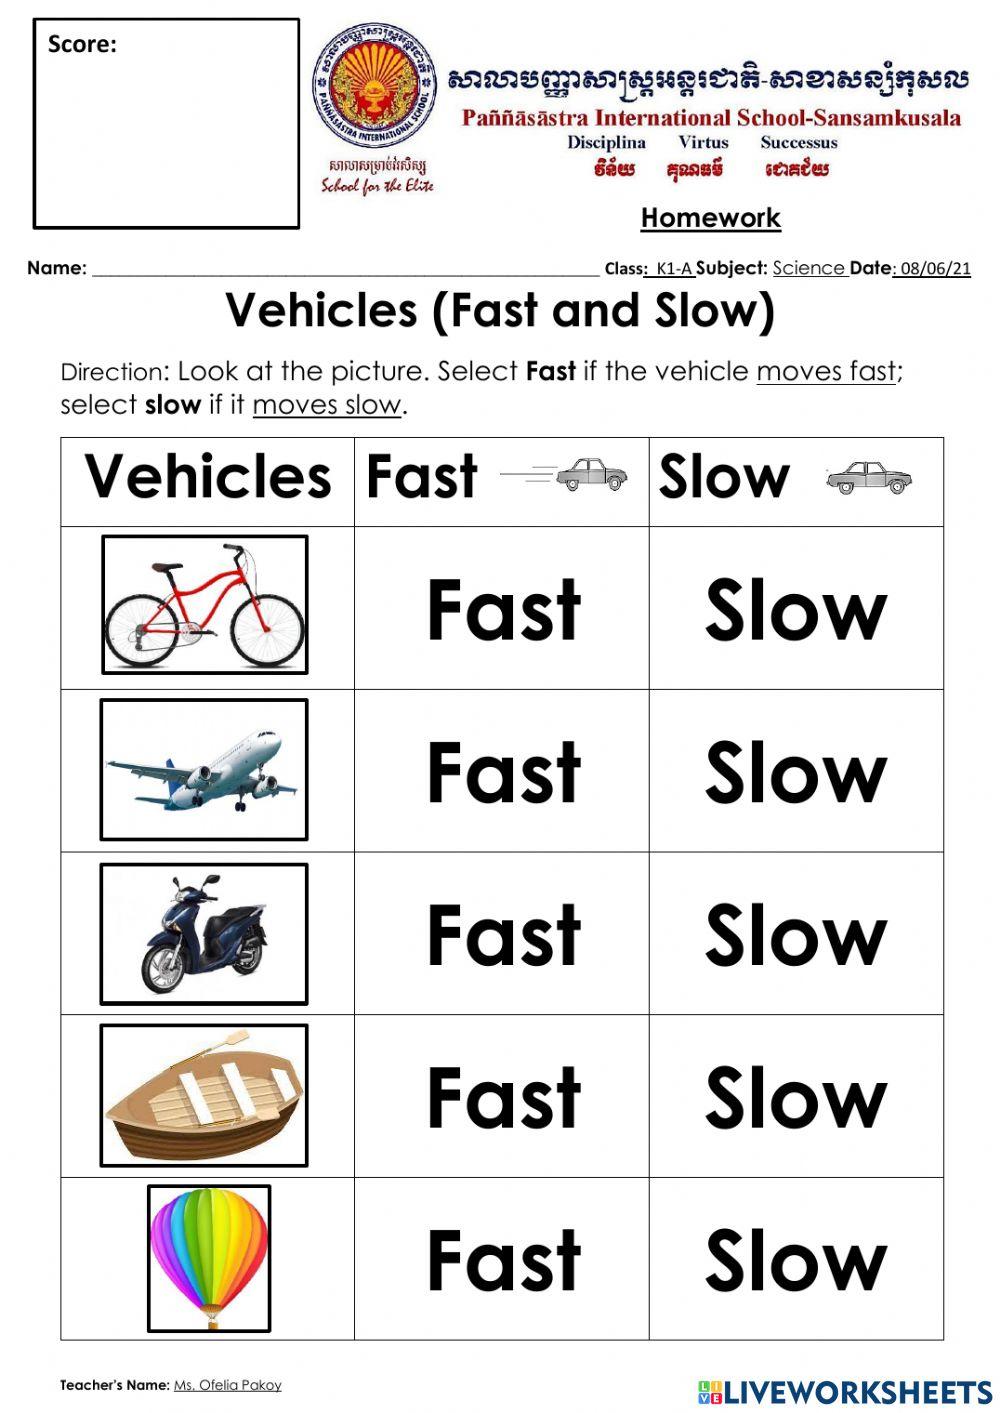 Vehicles(Fast and Slow)